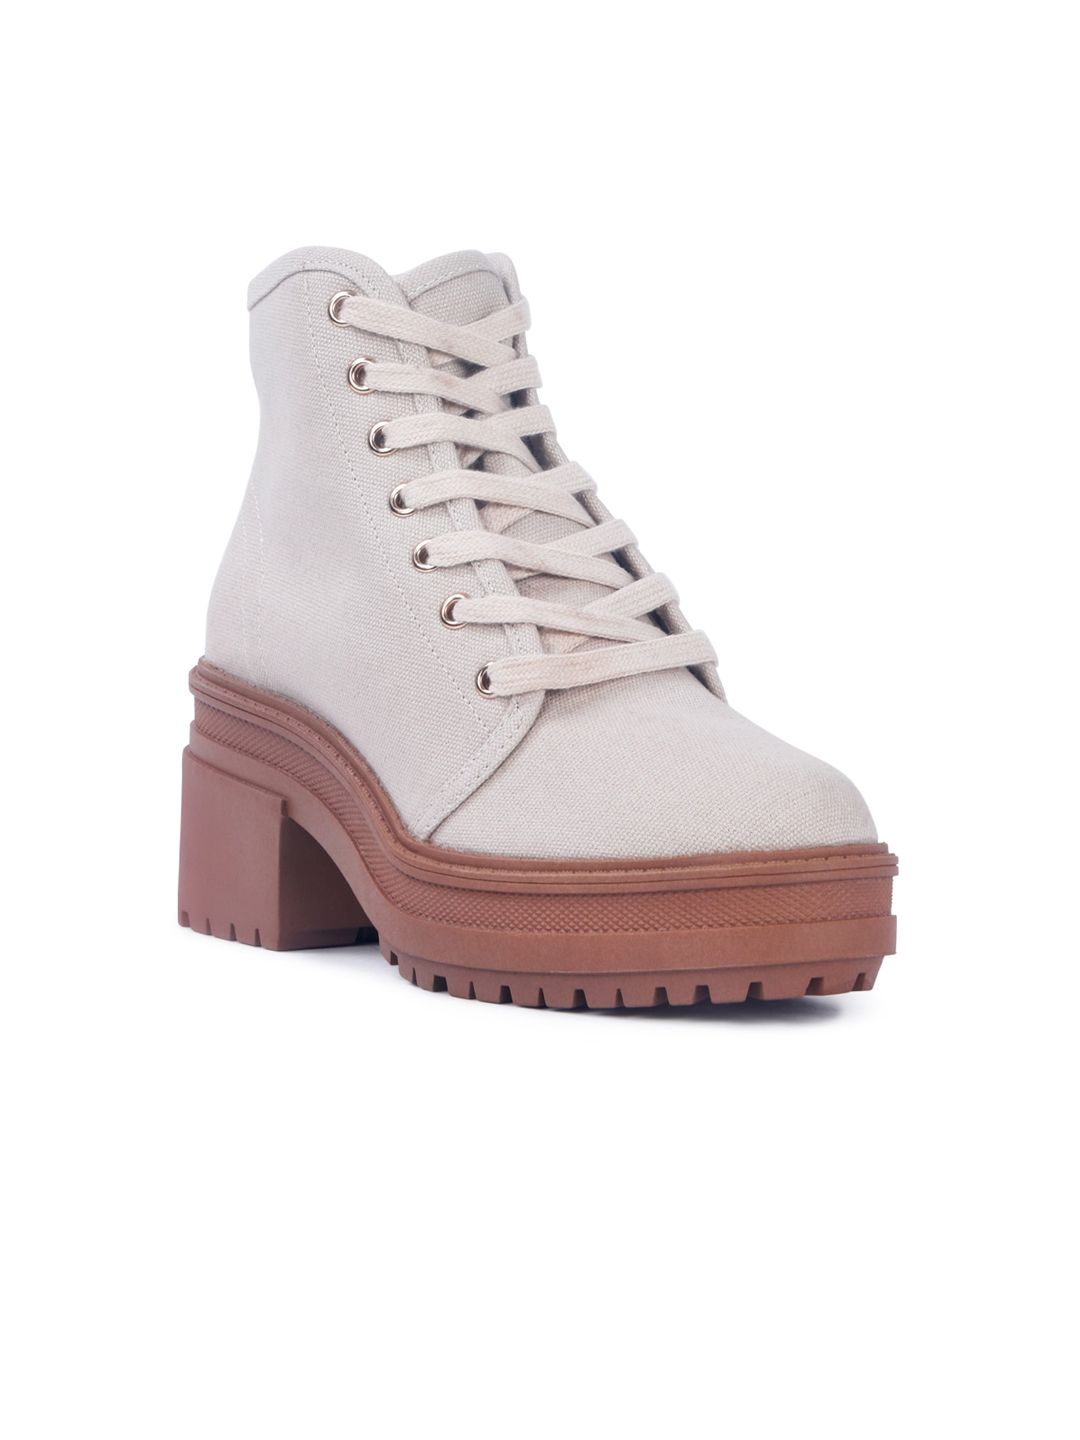 London Rag Women Off-White Solid Mid-Top Heeled Boots Price in India